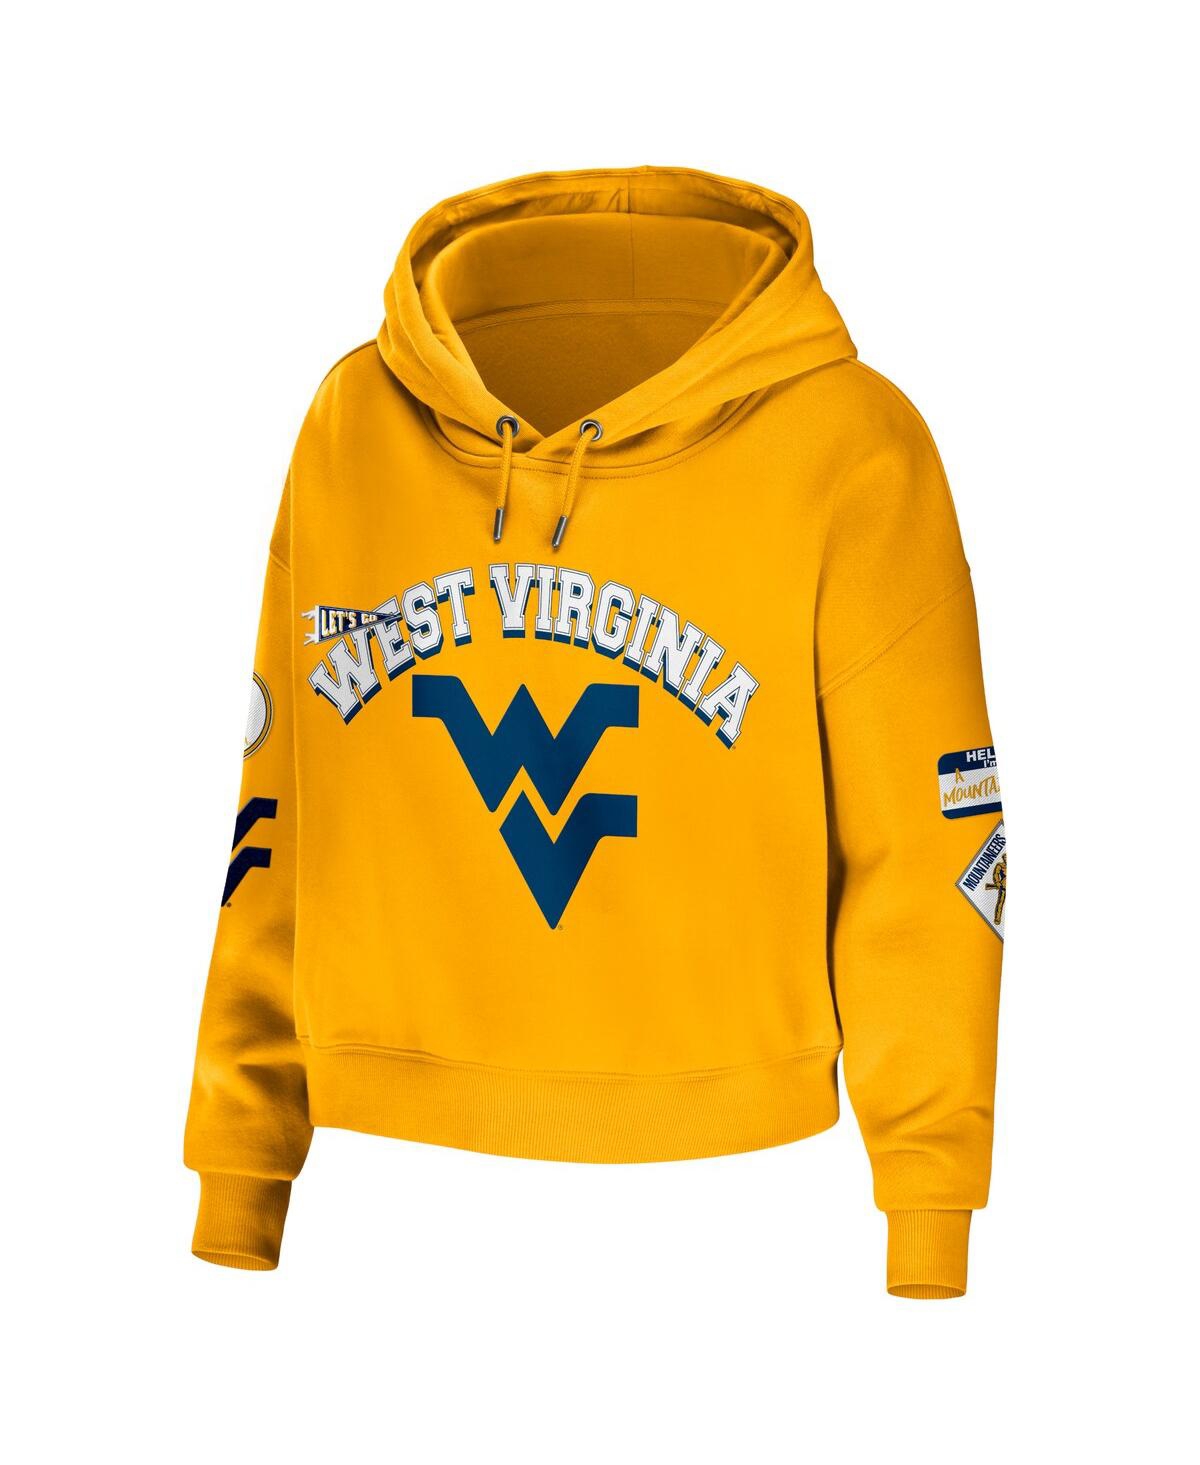 Shop Wear By Erin Andrews Women's  Gold West Virginia Mountaineers Mixed Media Cropped Pullover Hoodie